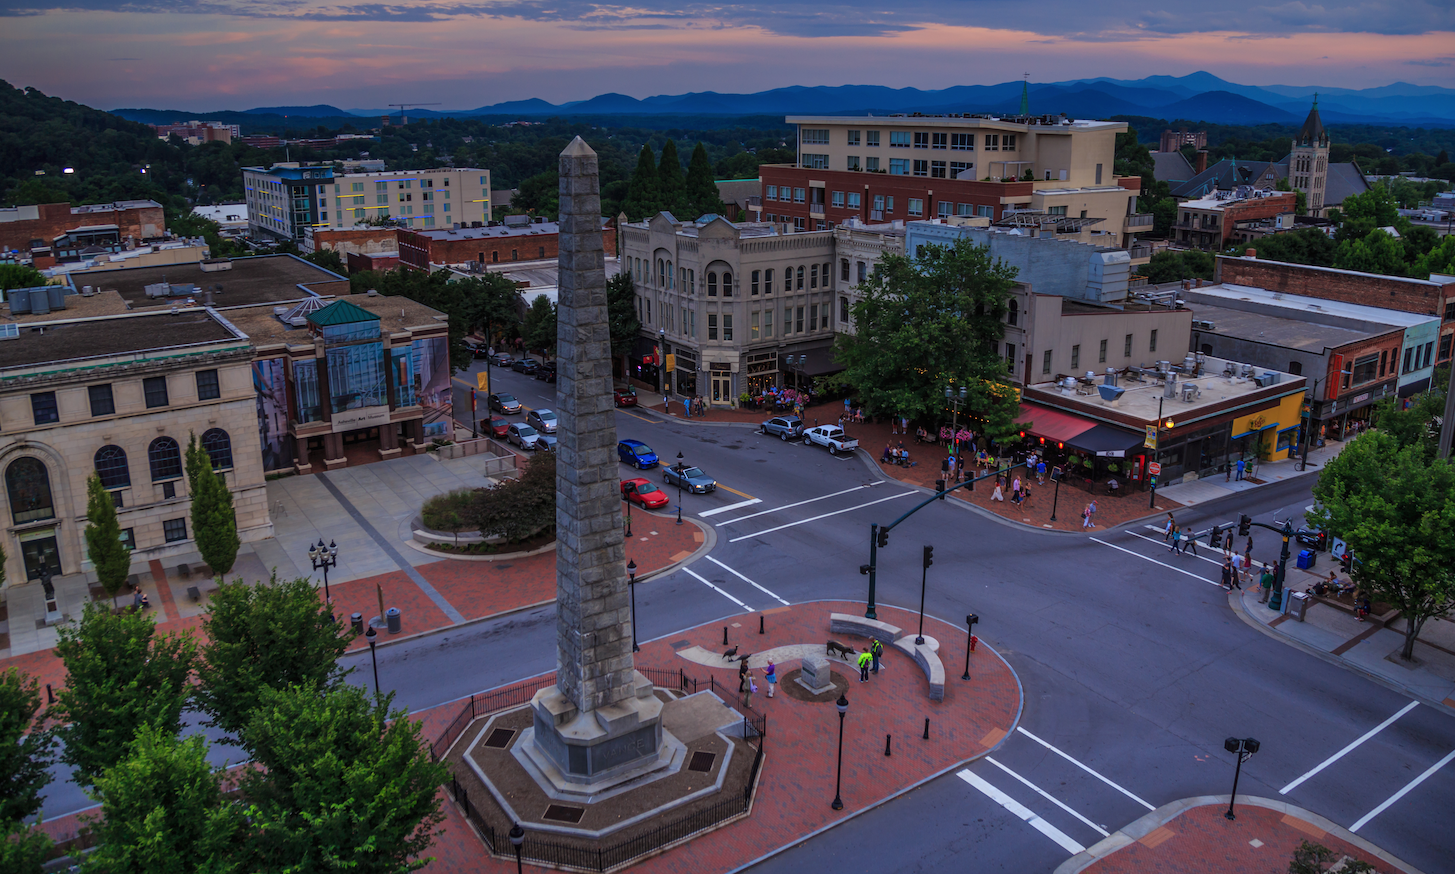  The mix of small-town charm, modern elegance, historic sites and outdoor activities make Asheville a great visit for all types of travelers. ( Photo courtesy exploreasheveille.com by Jared Kay)  